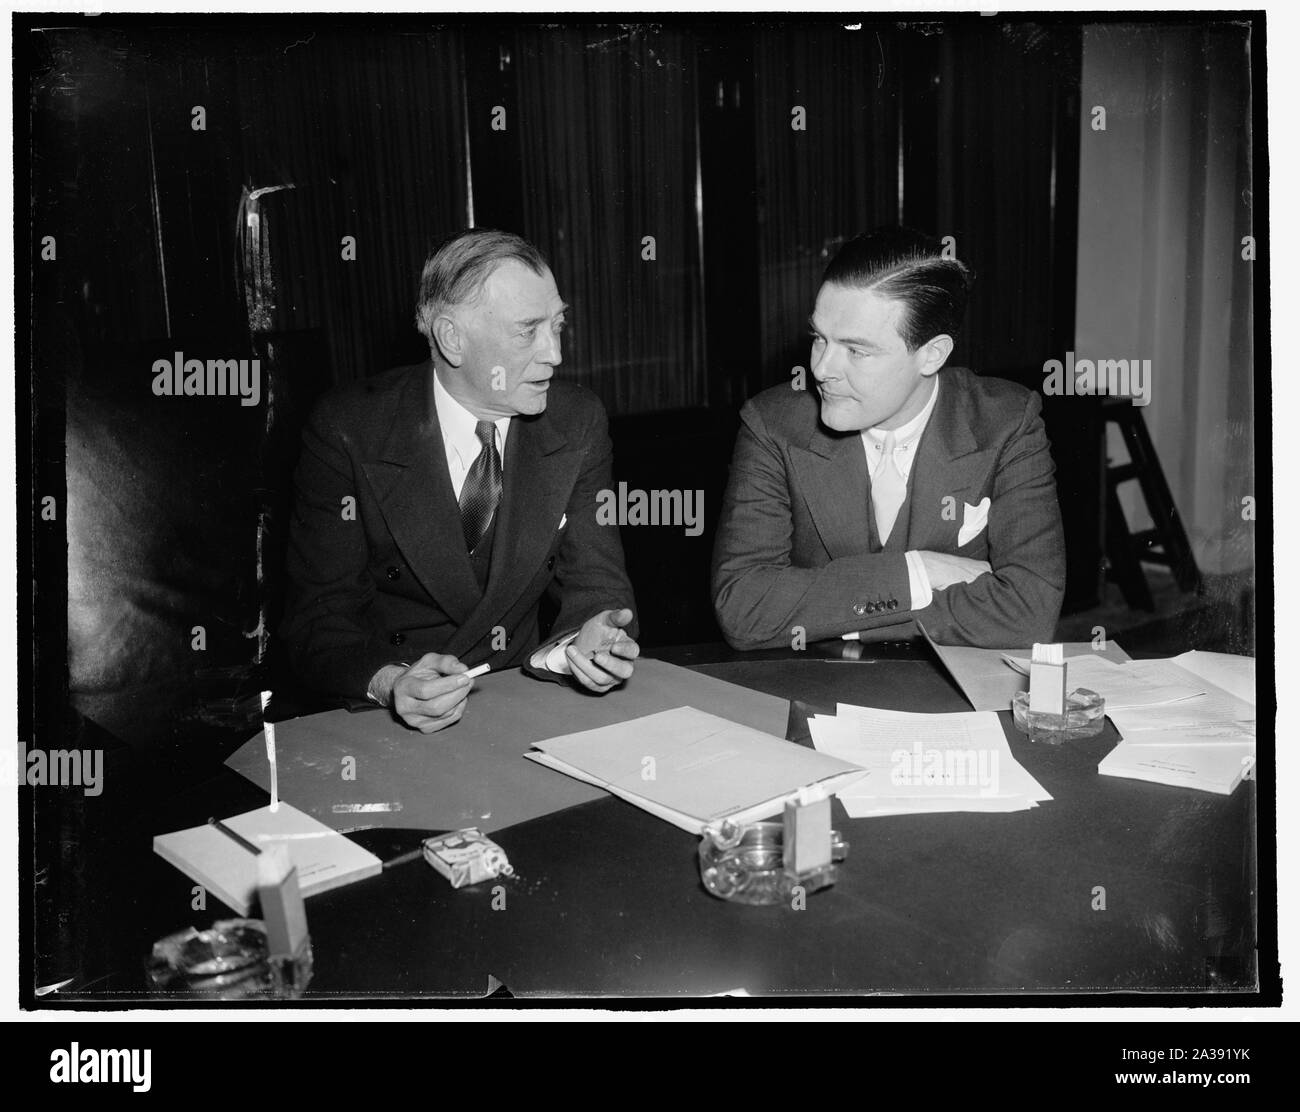 Sage advice. Washington, D.C., Feb. 2. Senator Key Pittman, Veteran from Nevada and Chairman of the Senate Foreign Relations Committee, discusses with the youthful Republican Senator Henry Cabot Lodge, of Massachusetts, the amendment he (lodge) has proposed to the Neutrality Act which would make the U.S. Neutral in fact as well in theory. Senator Lodge is also a member of the Senate Foreign Relations Committee, 2/2/38 Stock Photo